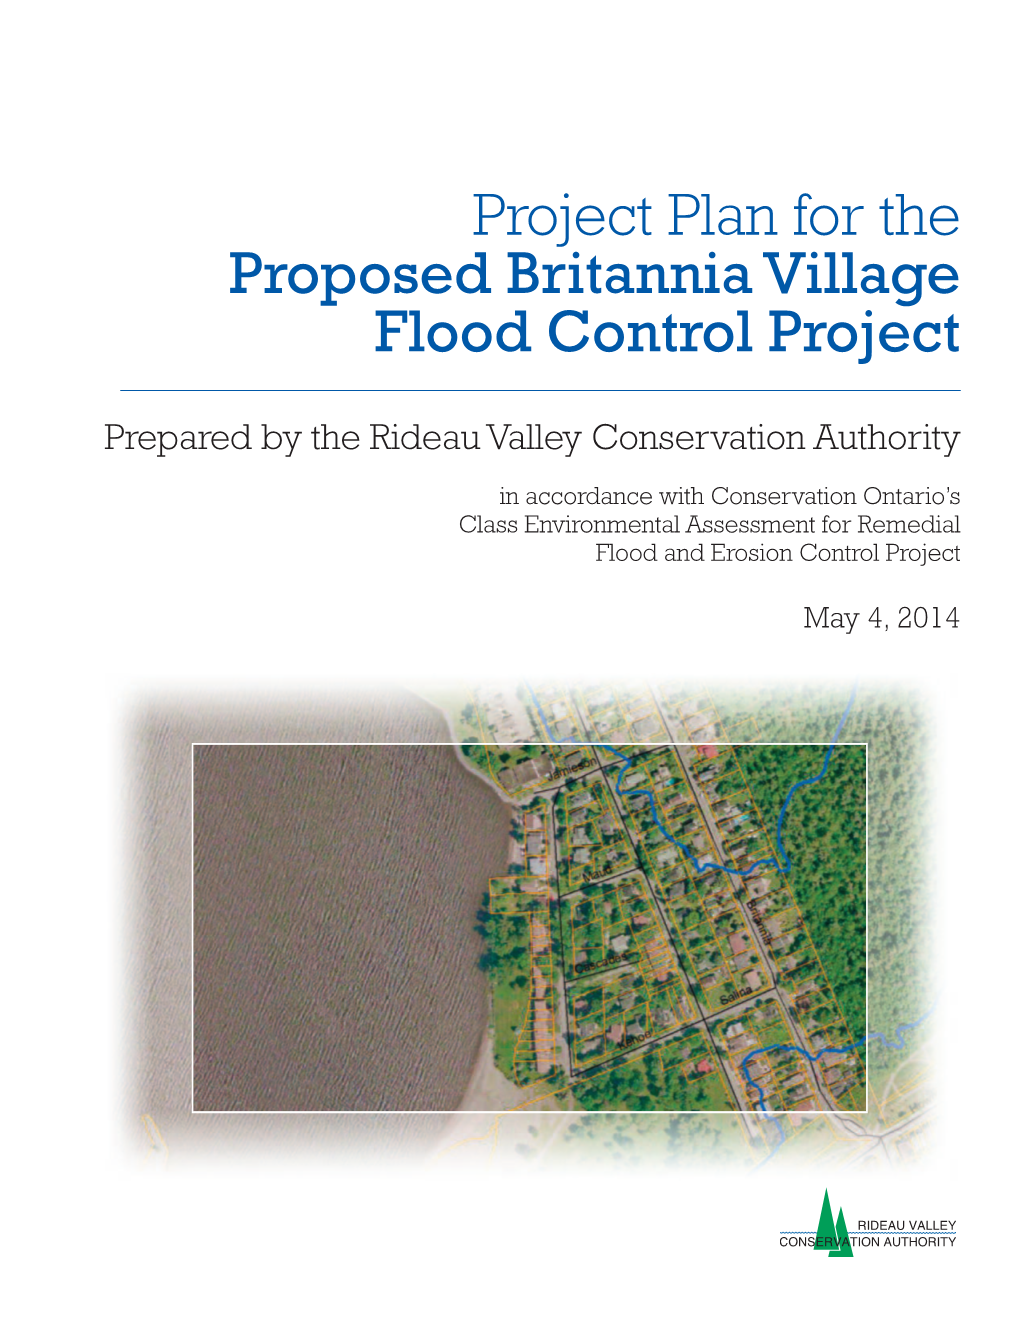 Project Plan for the Proposed Britannia Village Flood Control Project